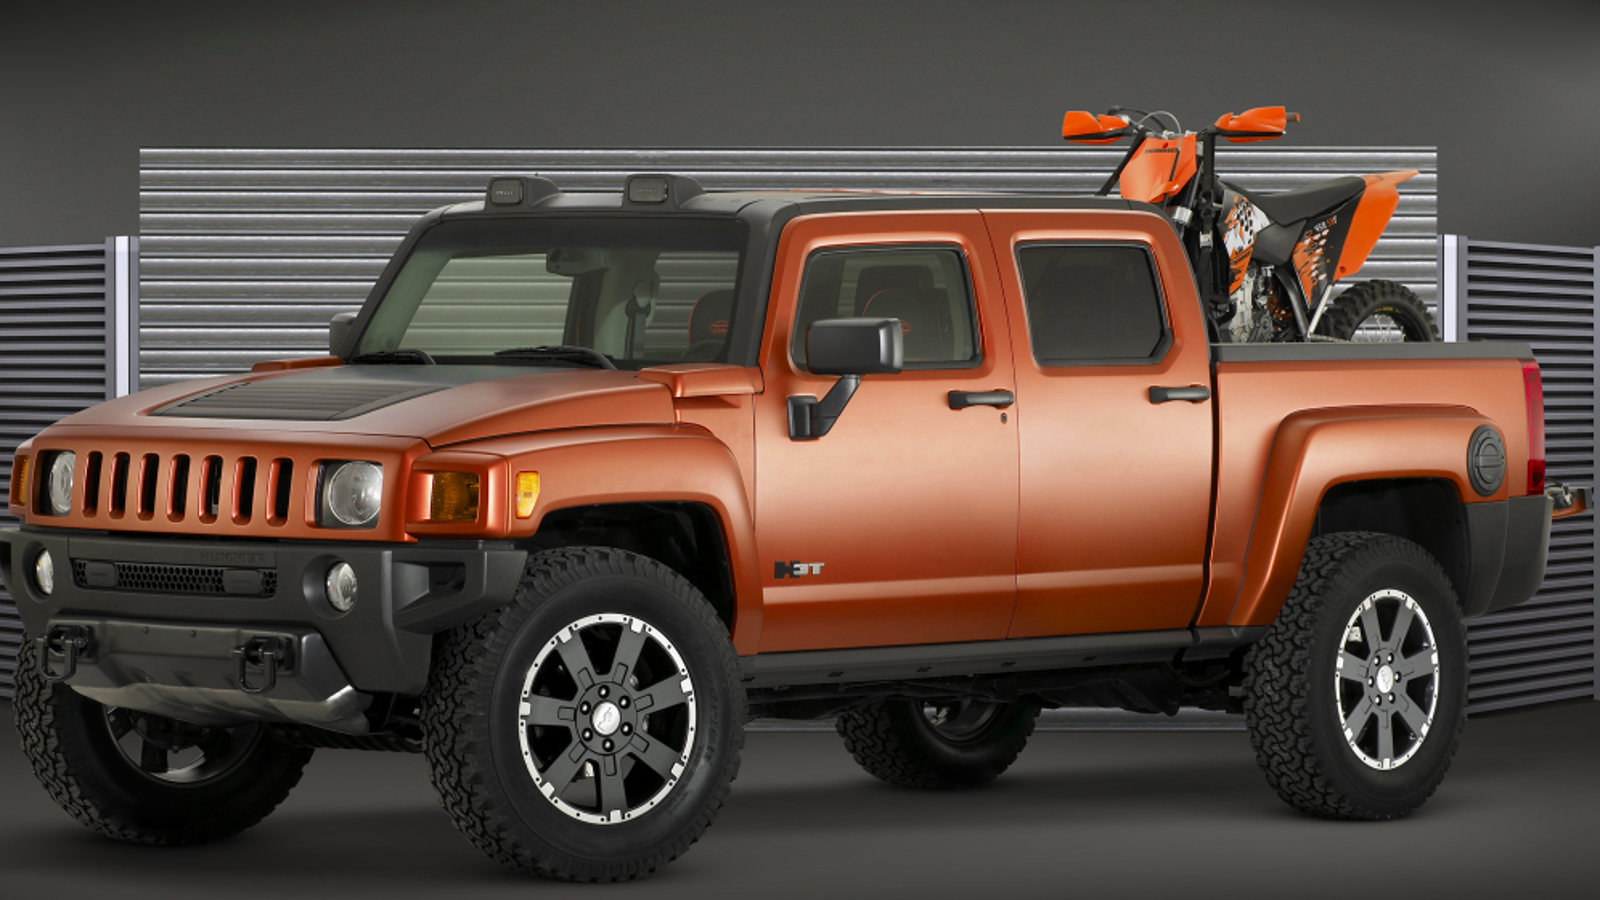 Hummer Is Coming Back As An Electric Off-Road Pickup By GMC: Wall Street Journal1600 x 900